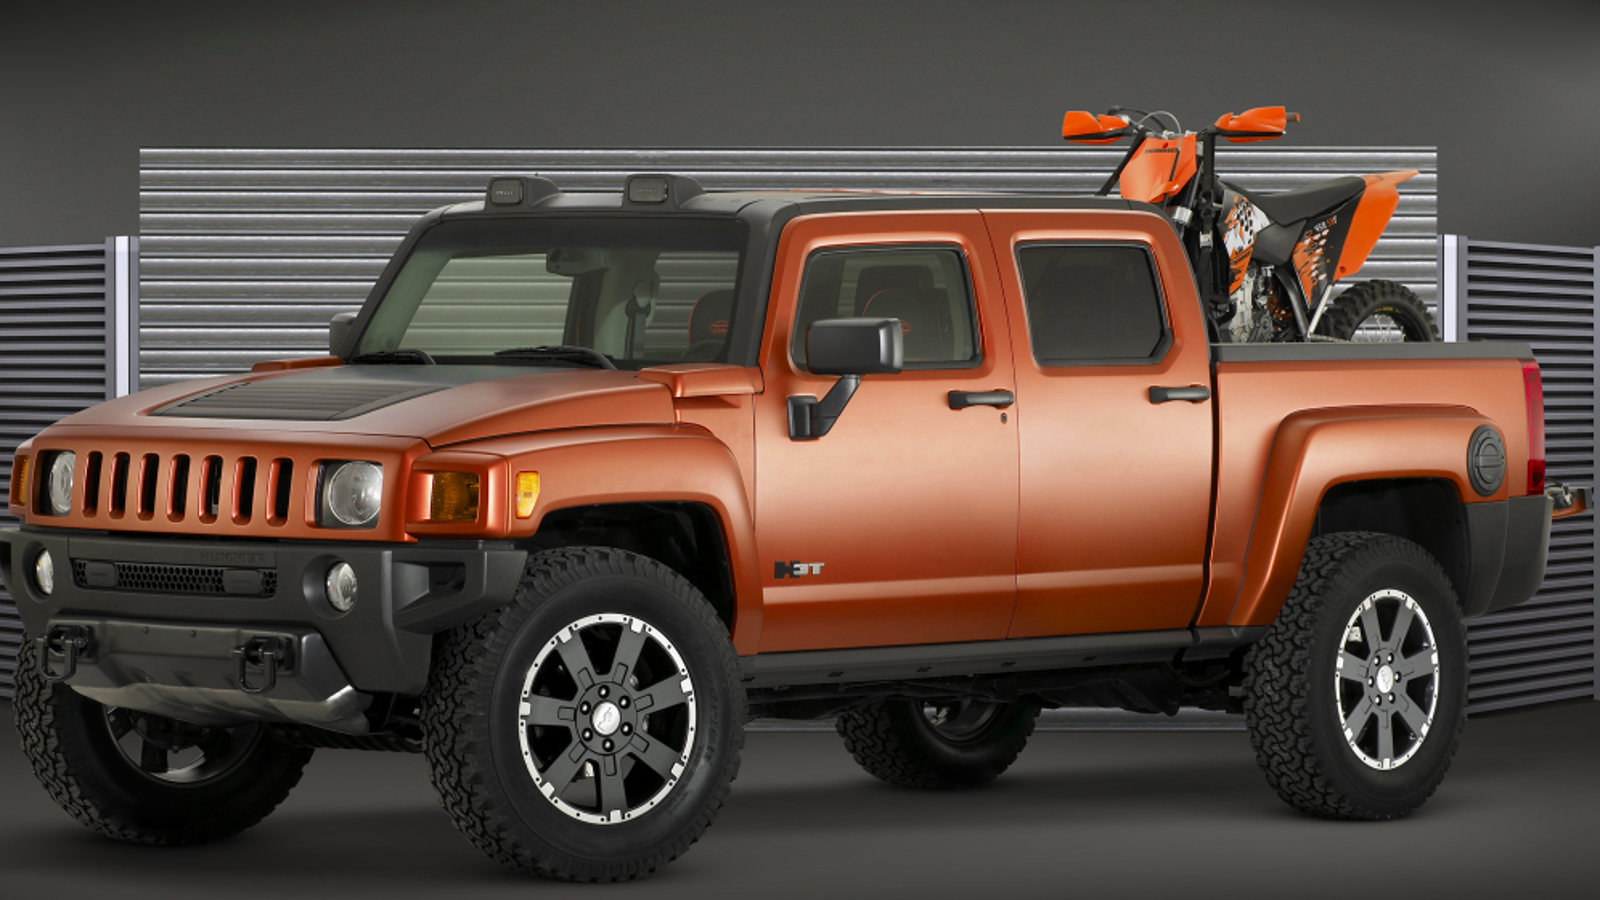 Hummer Is Coming Back As An Electric Off-Road Pickup By GMC: Wall Street Journal1600 x 900